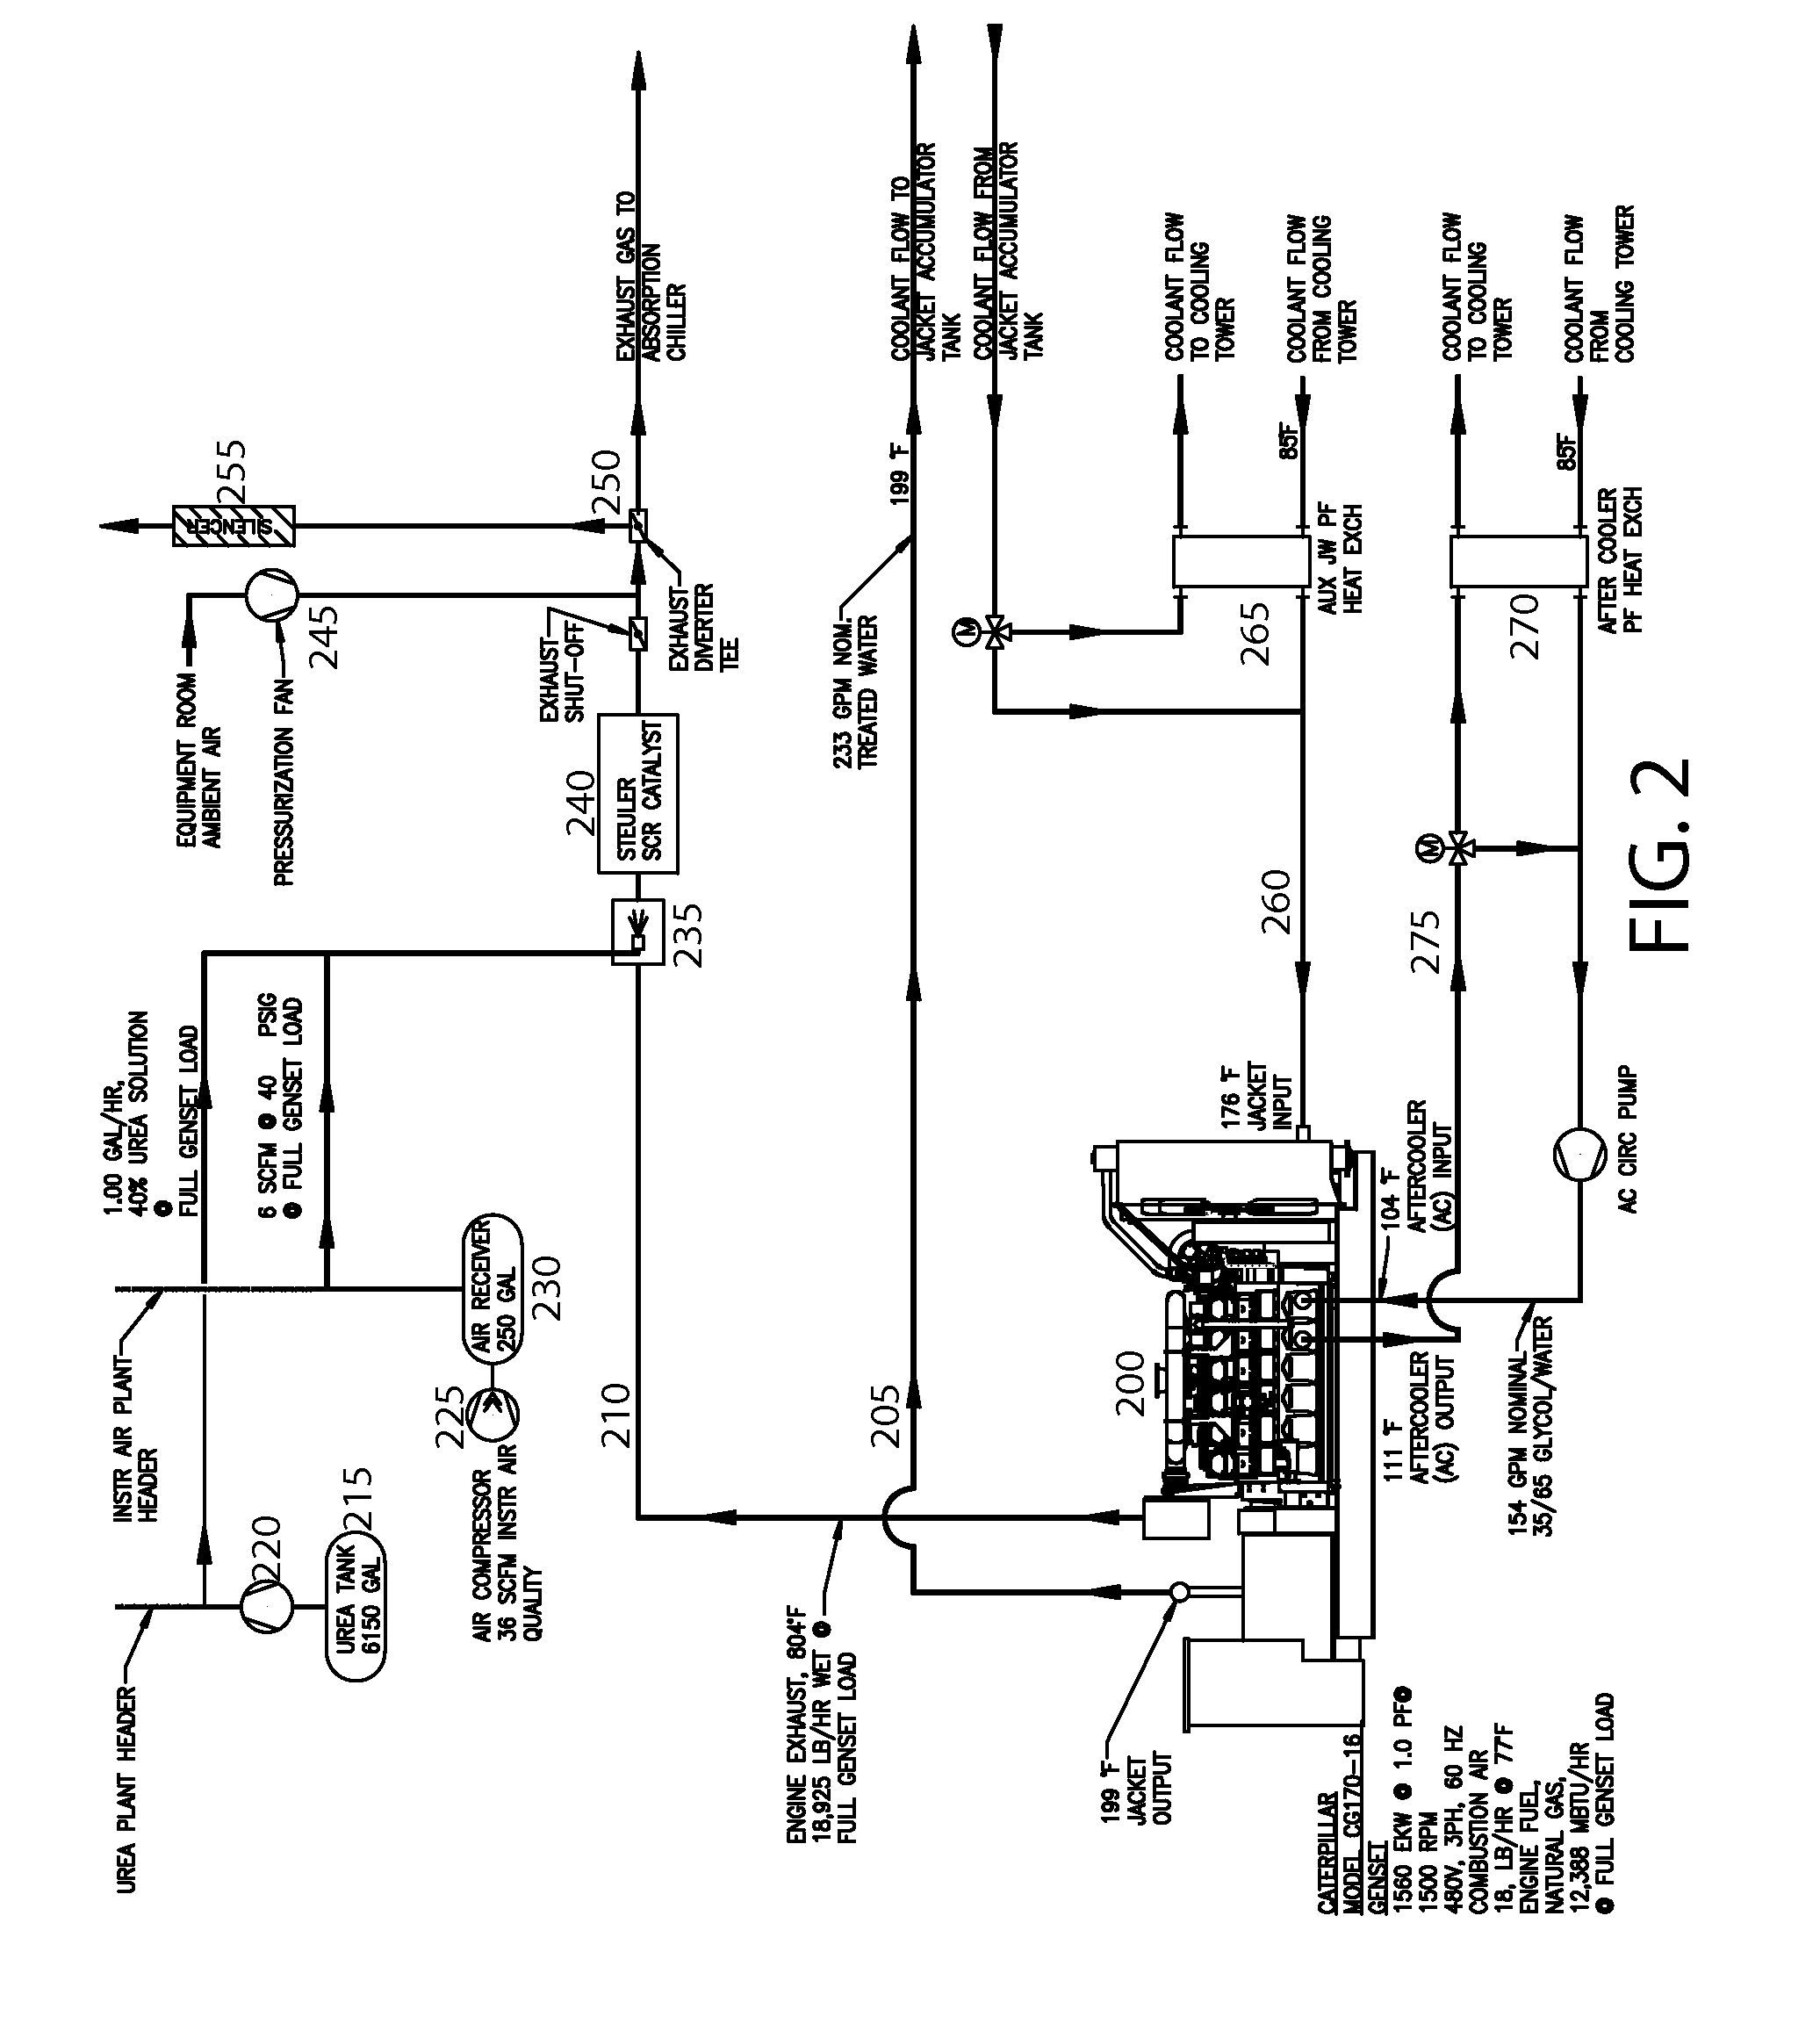 Climate control system and method for a greenhouse